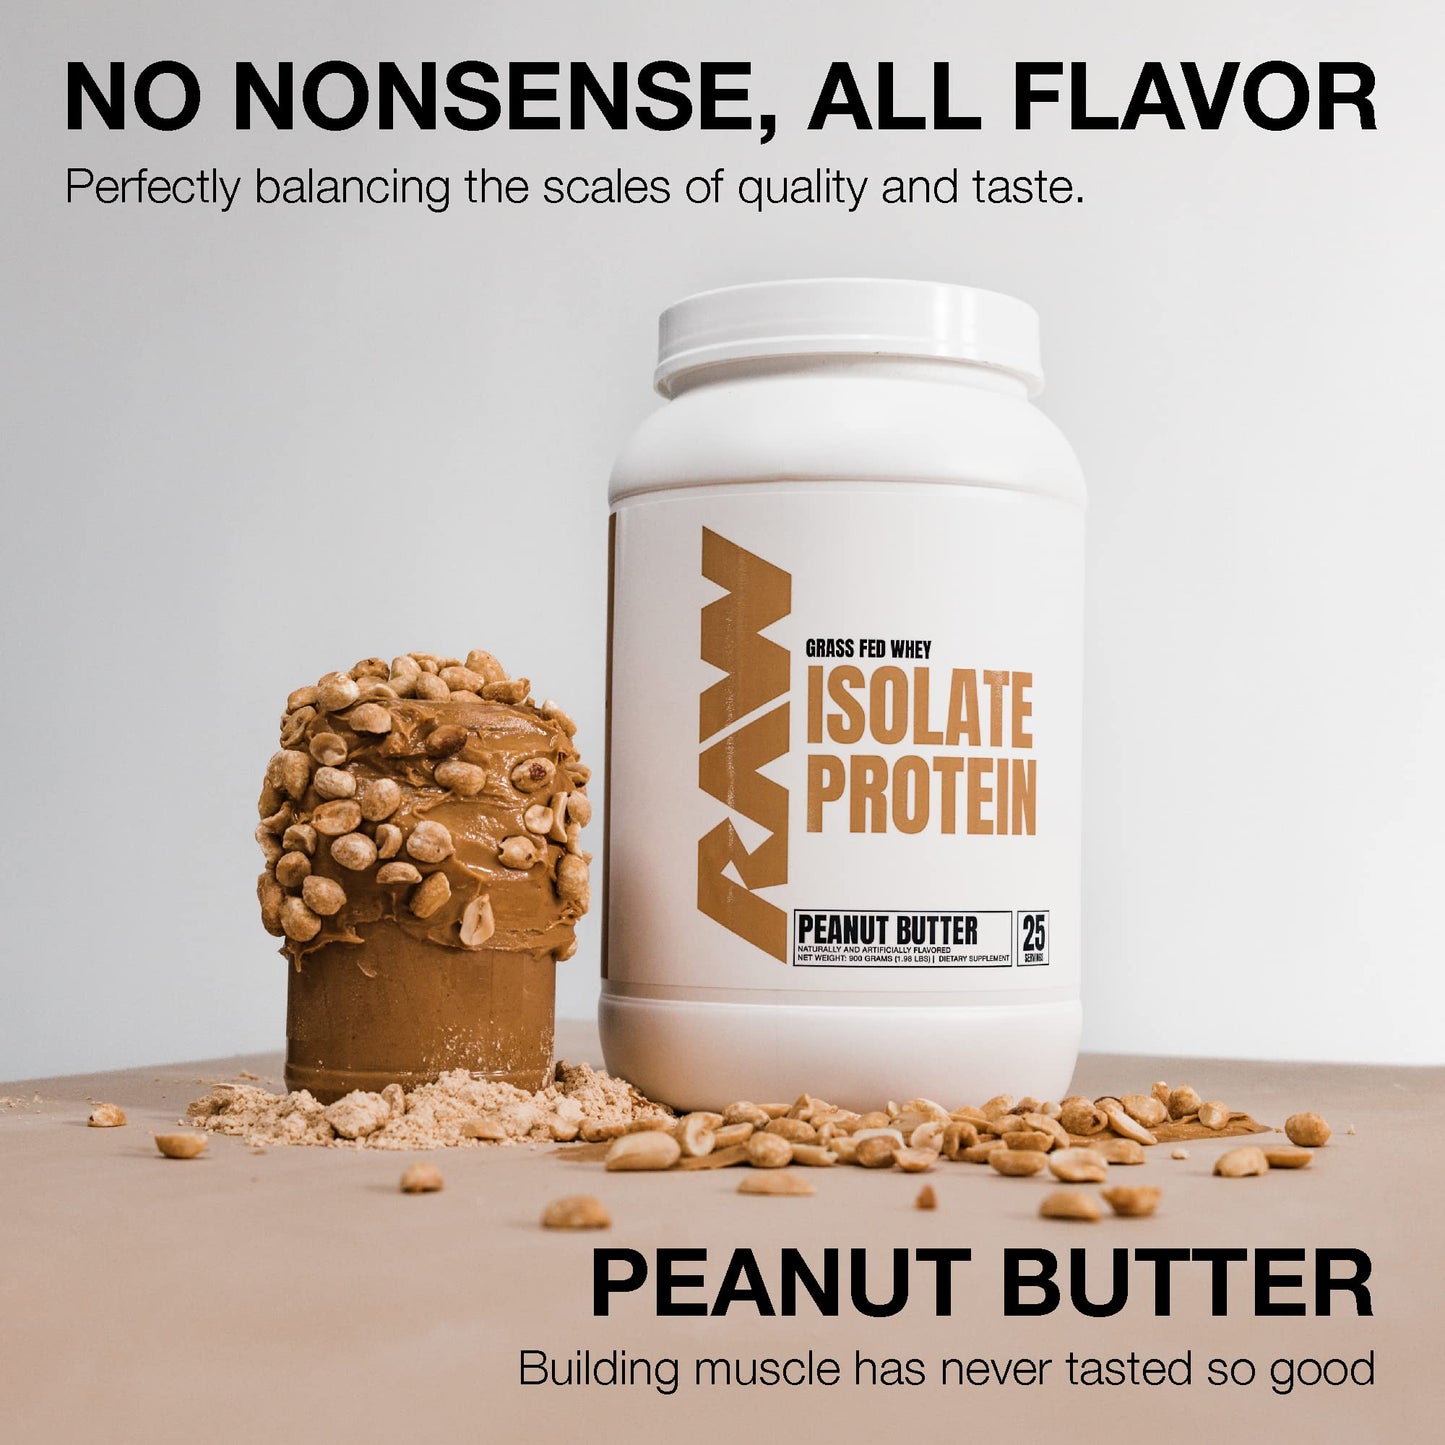 RAW Whey Isolate Protein Powder, Peanut Butter - 100% Grass-Fed Sports Nutrition Protein Powder for Muscle Growth & Recovery - Low-Fat, Low Carb, Naturally Flavored & Sweetened - 25 Servings